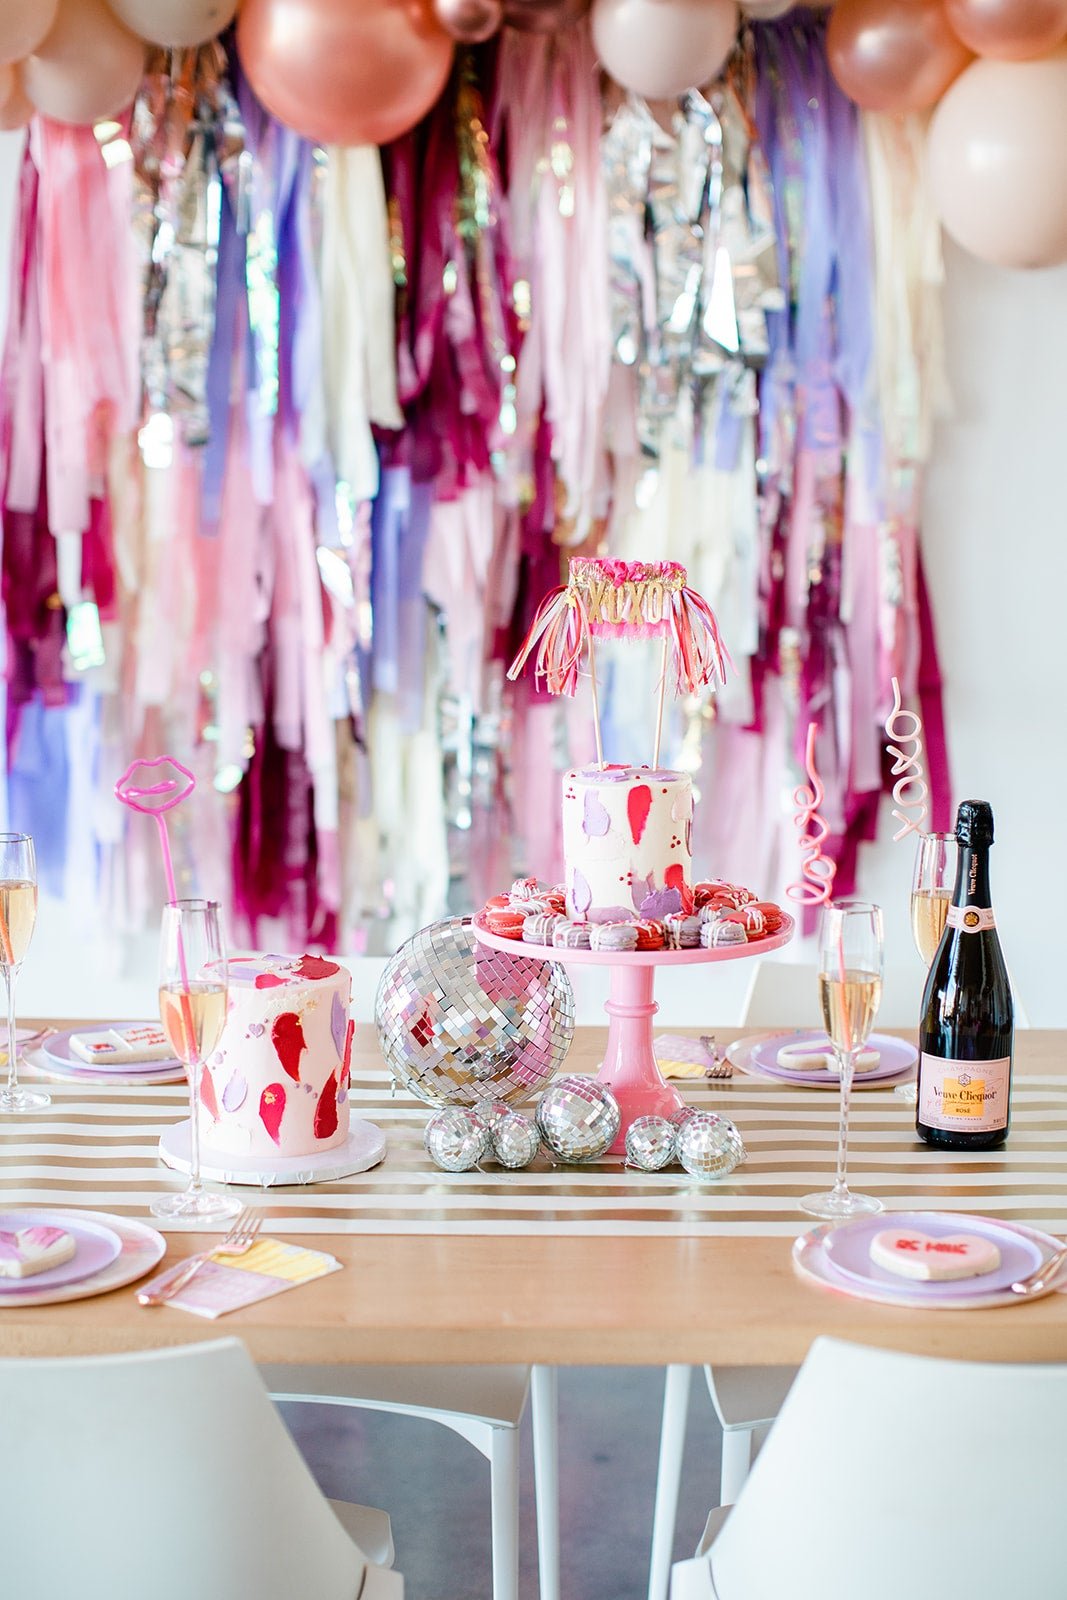 Sweet Shop Valentine's Day Backdrop - Oh My Darling Party Co-baby showerblushbridal shower #Fringe_Backdrop#